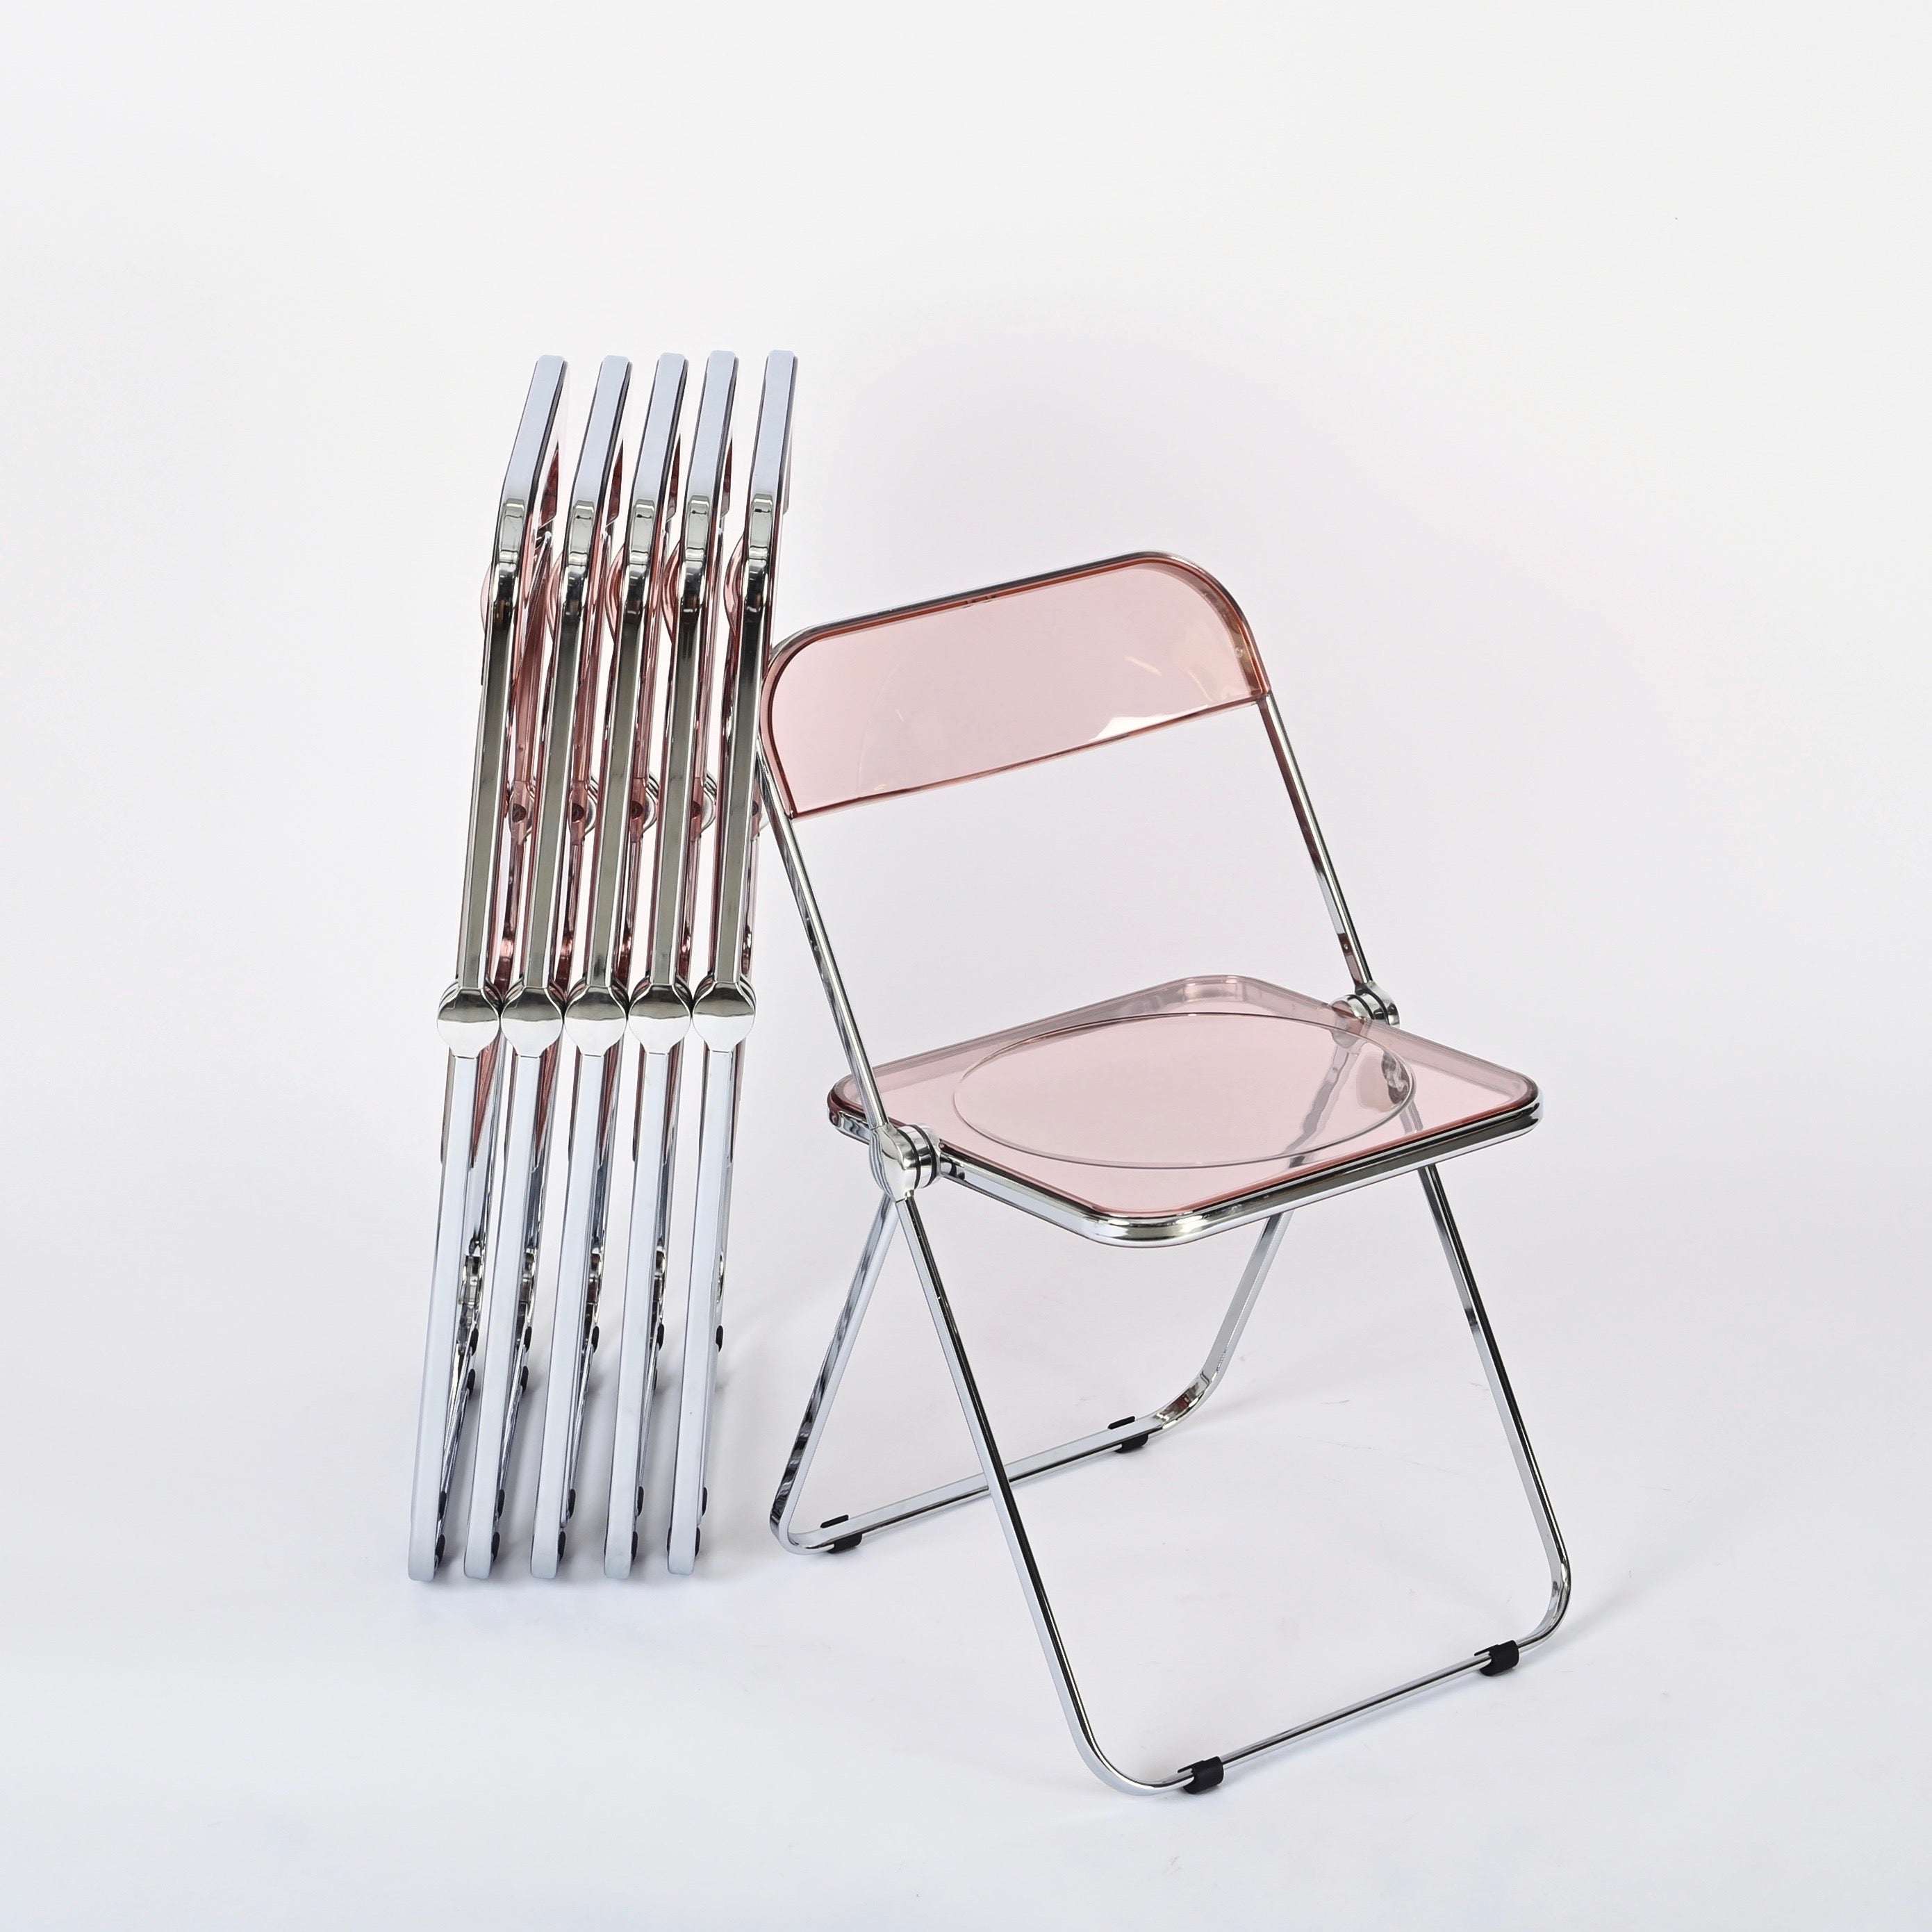 Set of 6 Lucite Pink and Chrome Plia Chairs, Piretti for Castelli, Italy 1970s For Sale